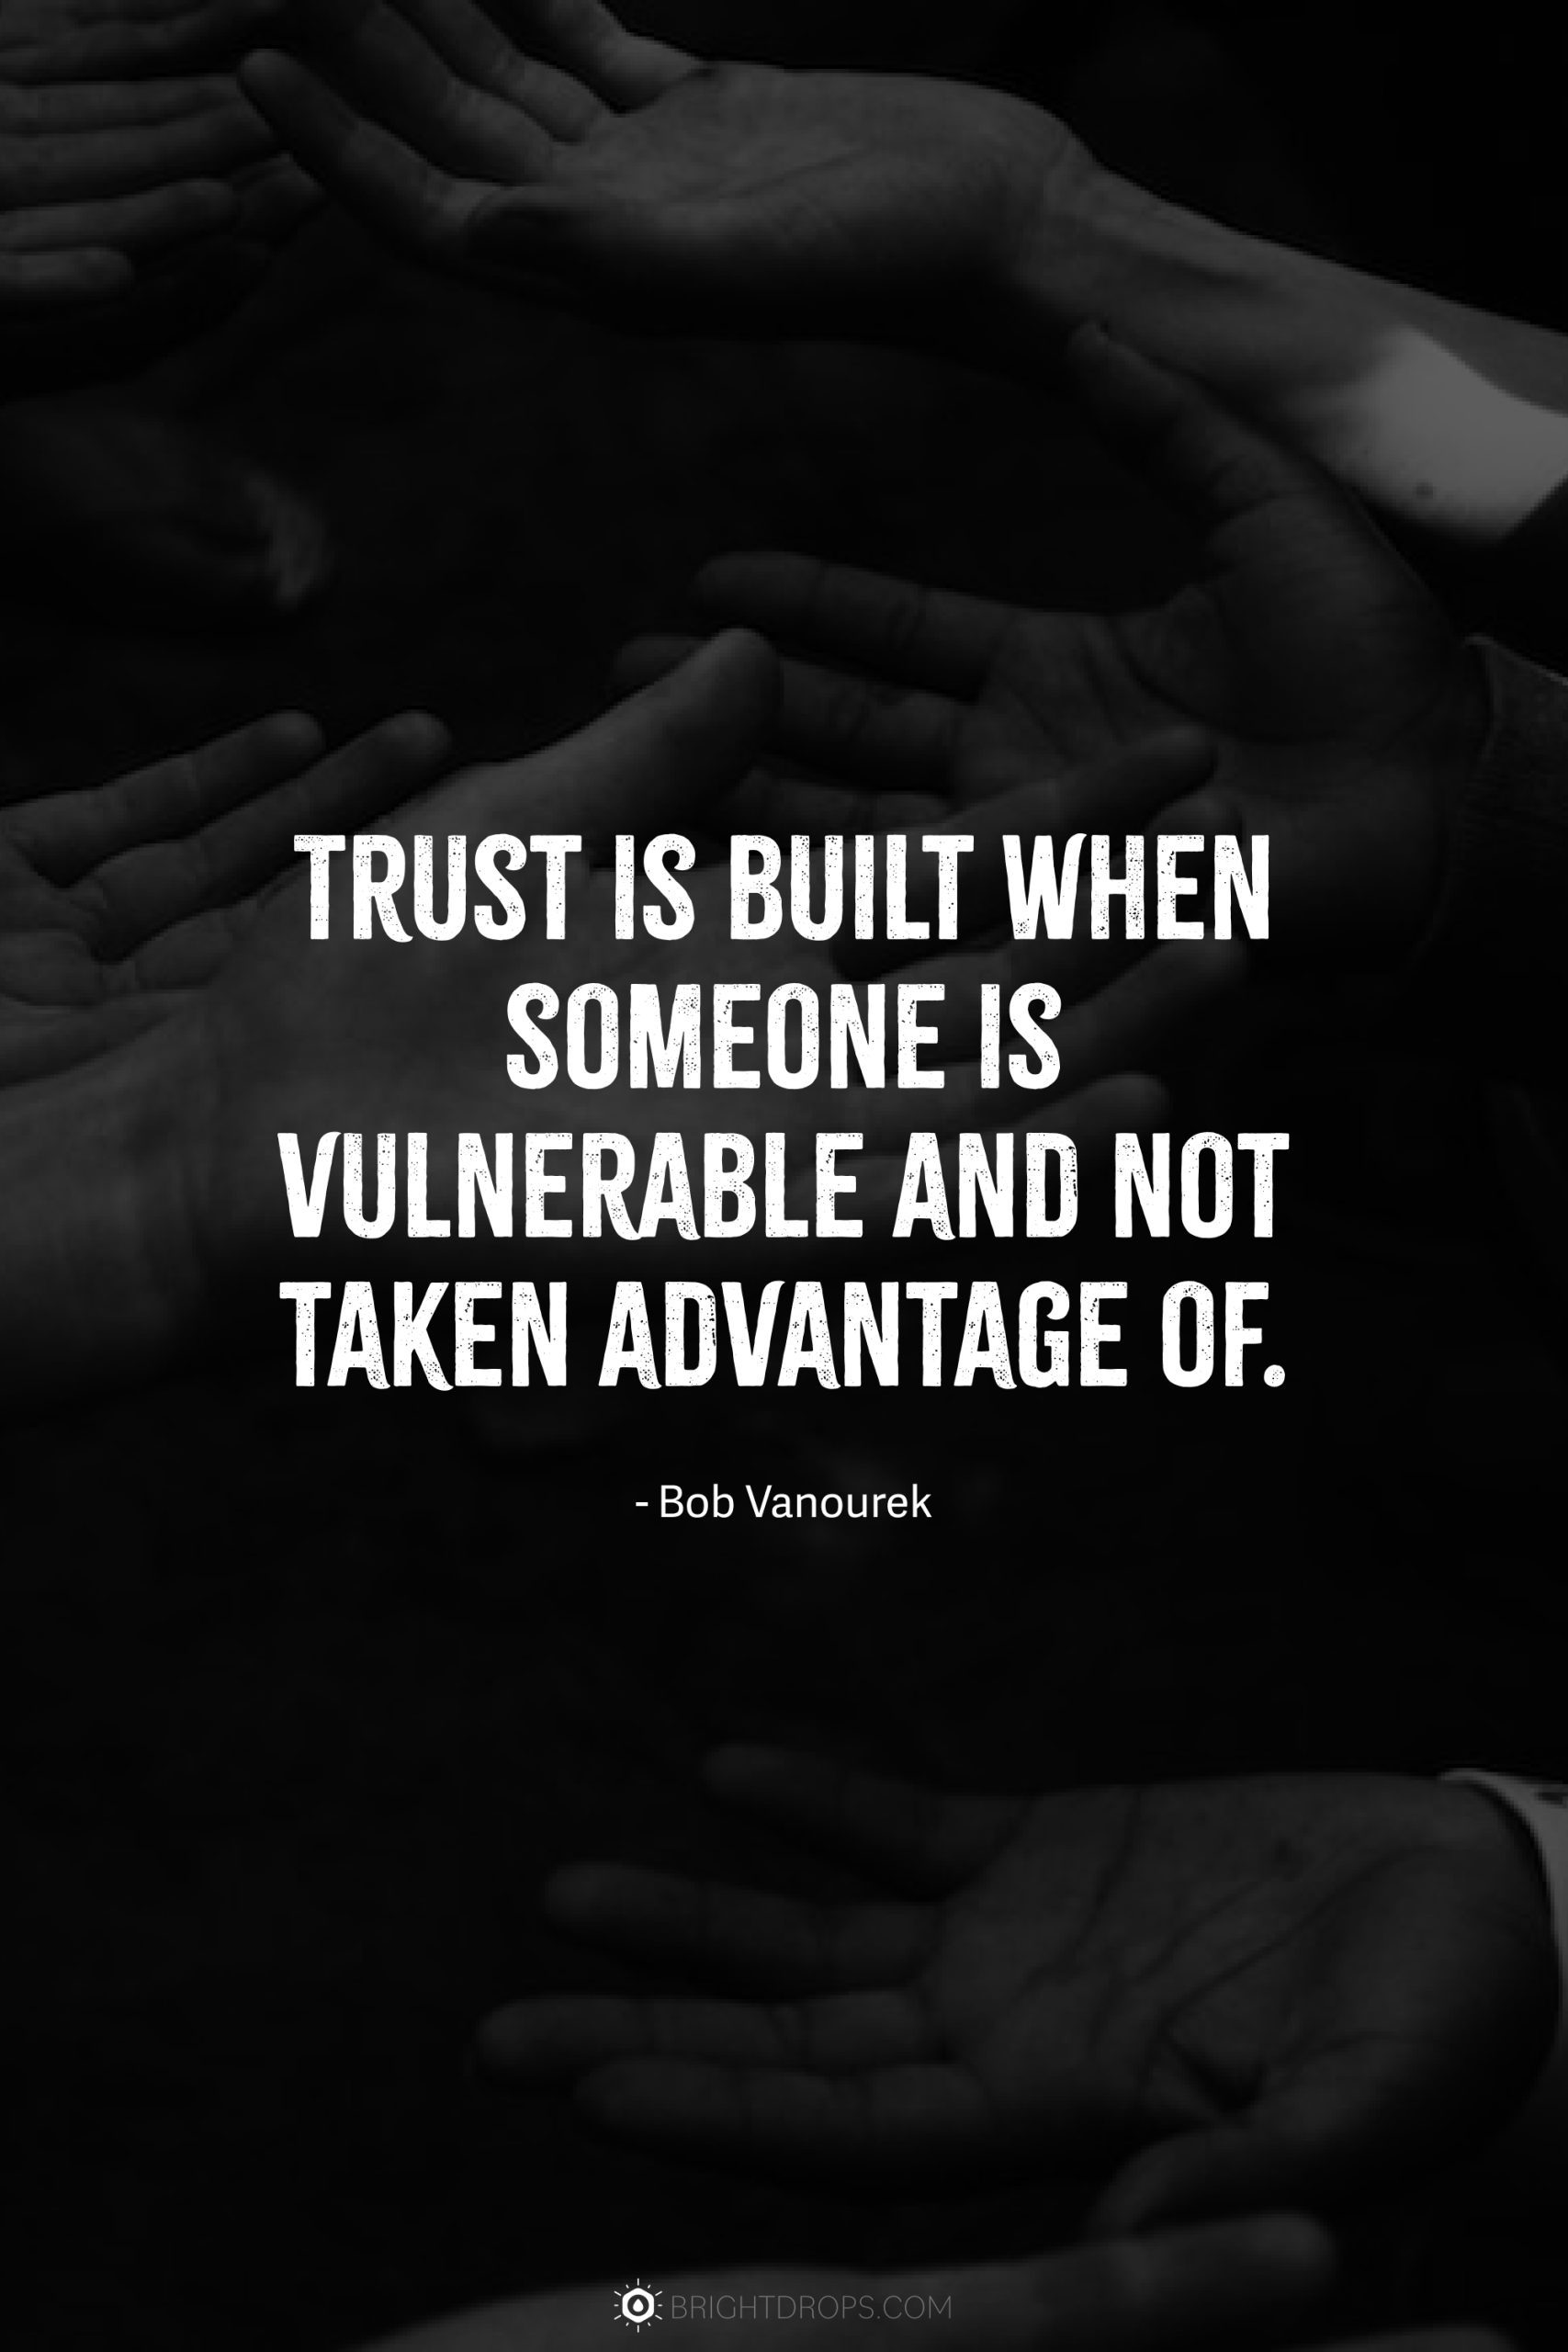 Trust is built when someone is vulnerable and not taken advantage of.